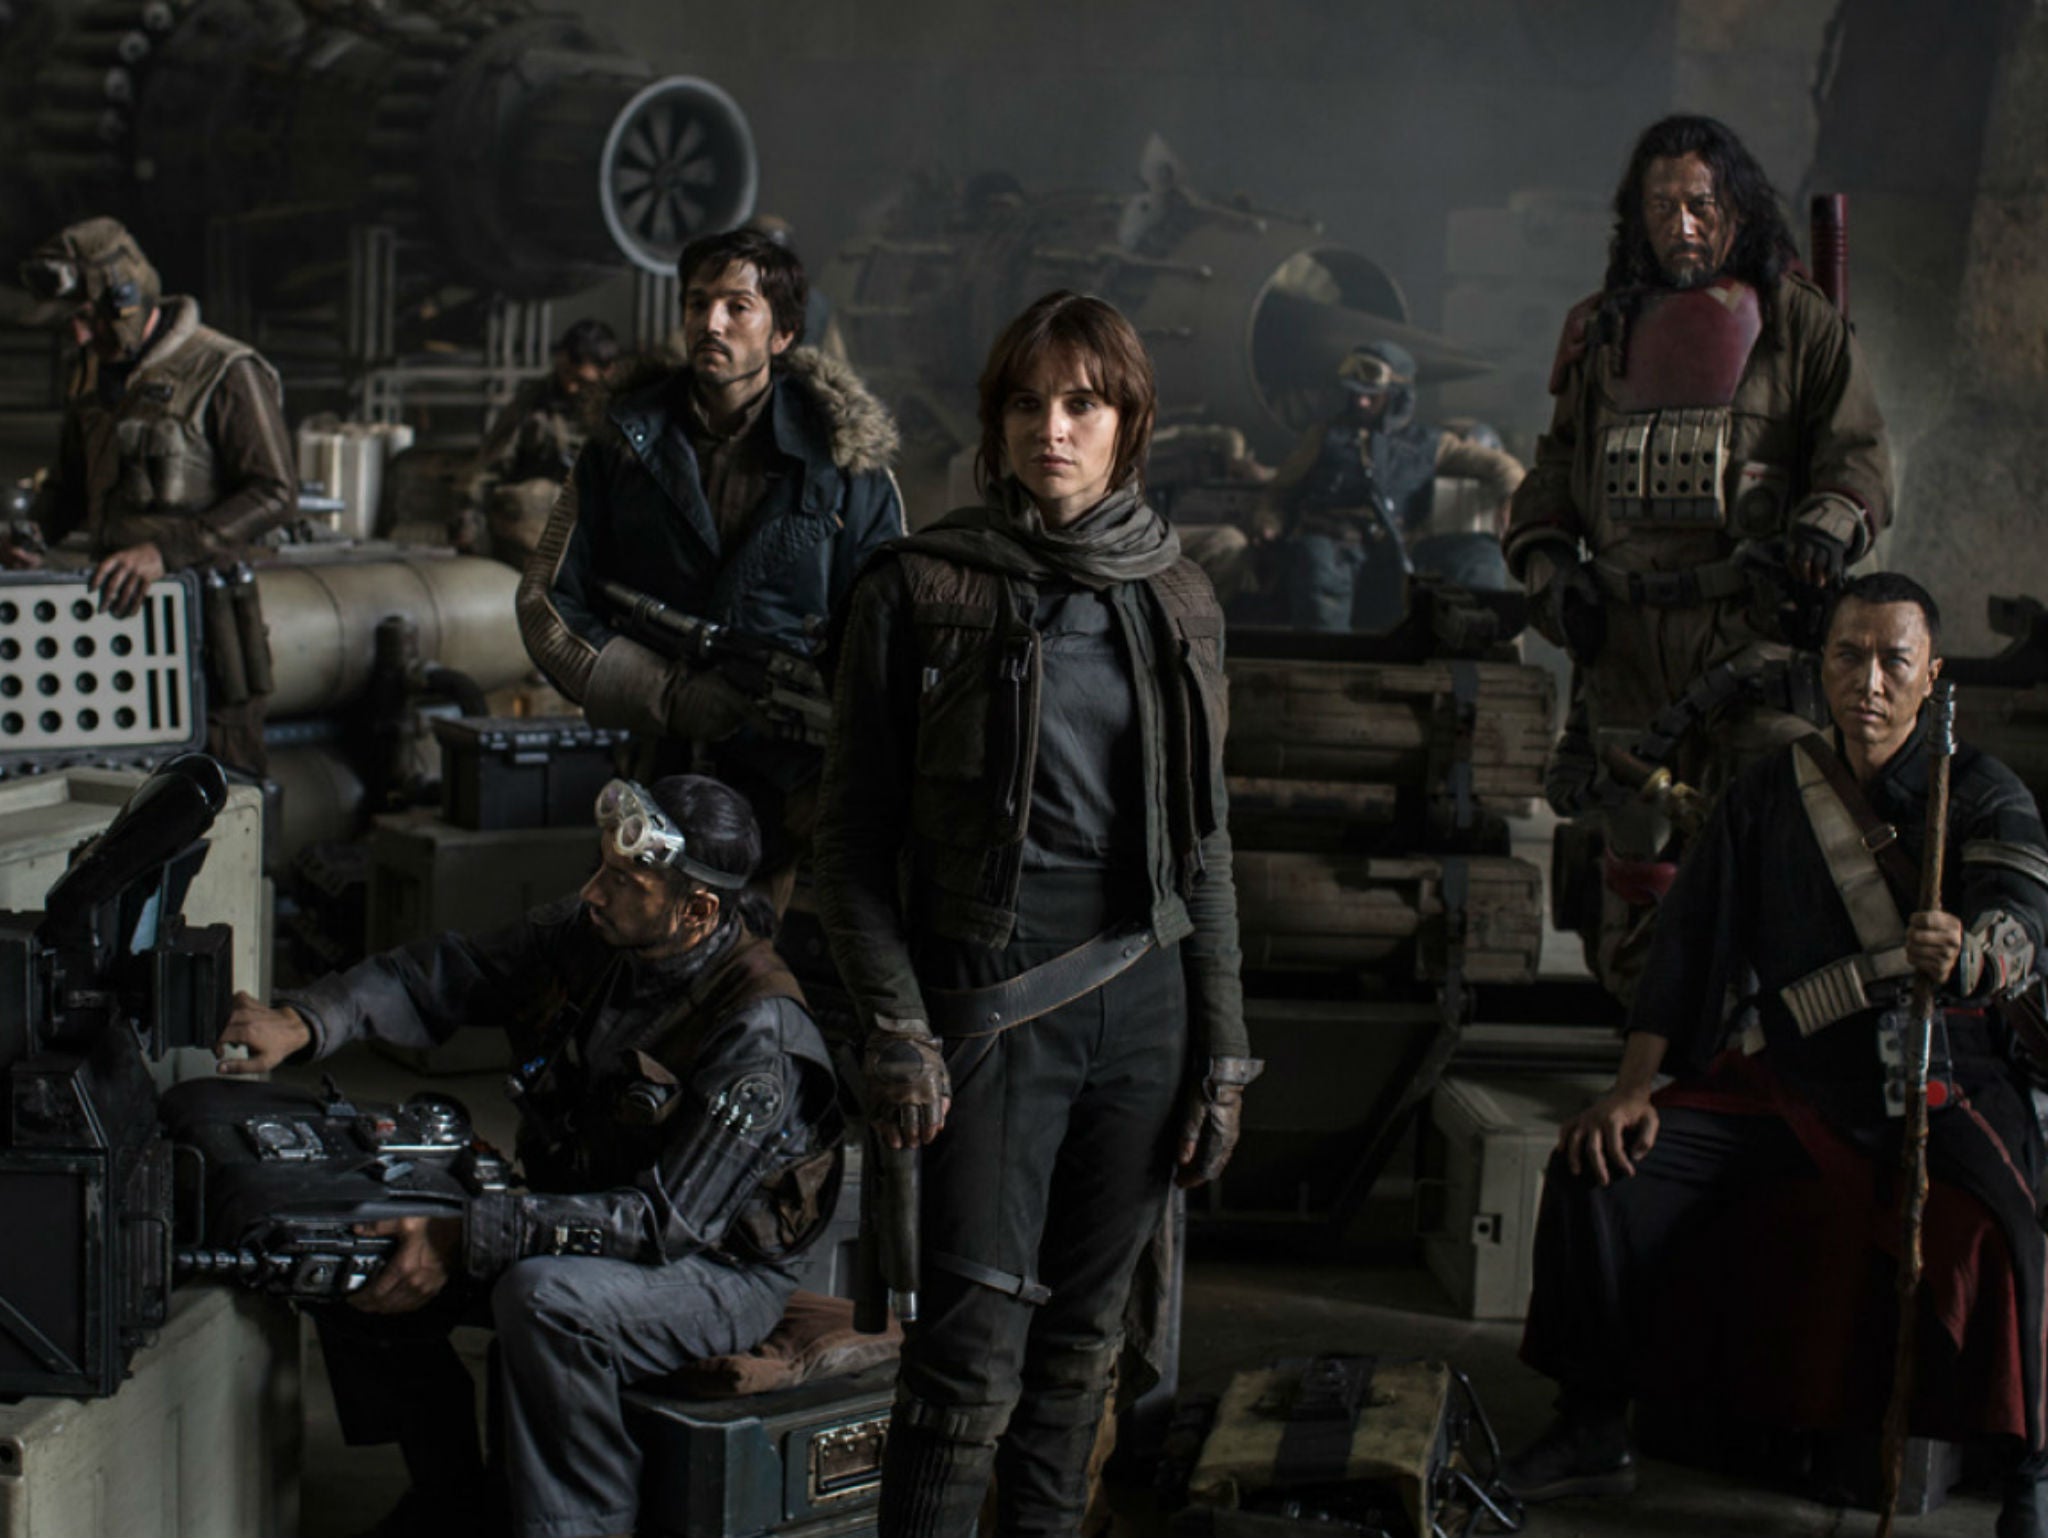 Star Wars: Rogue One cast. Left to Right: Riz Ahmed, Diego Luna, Felicity Jones, Jiang Wen and Donnie Yen